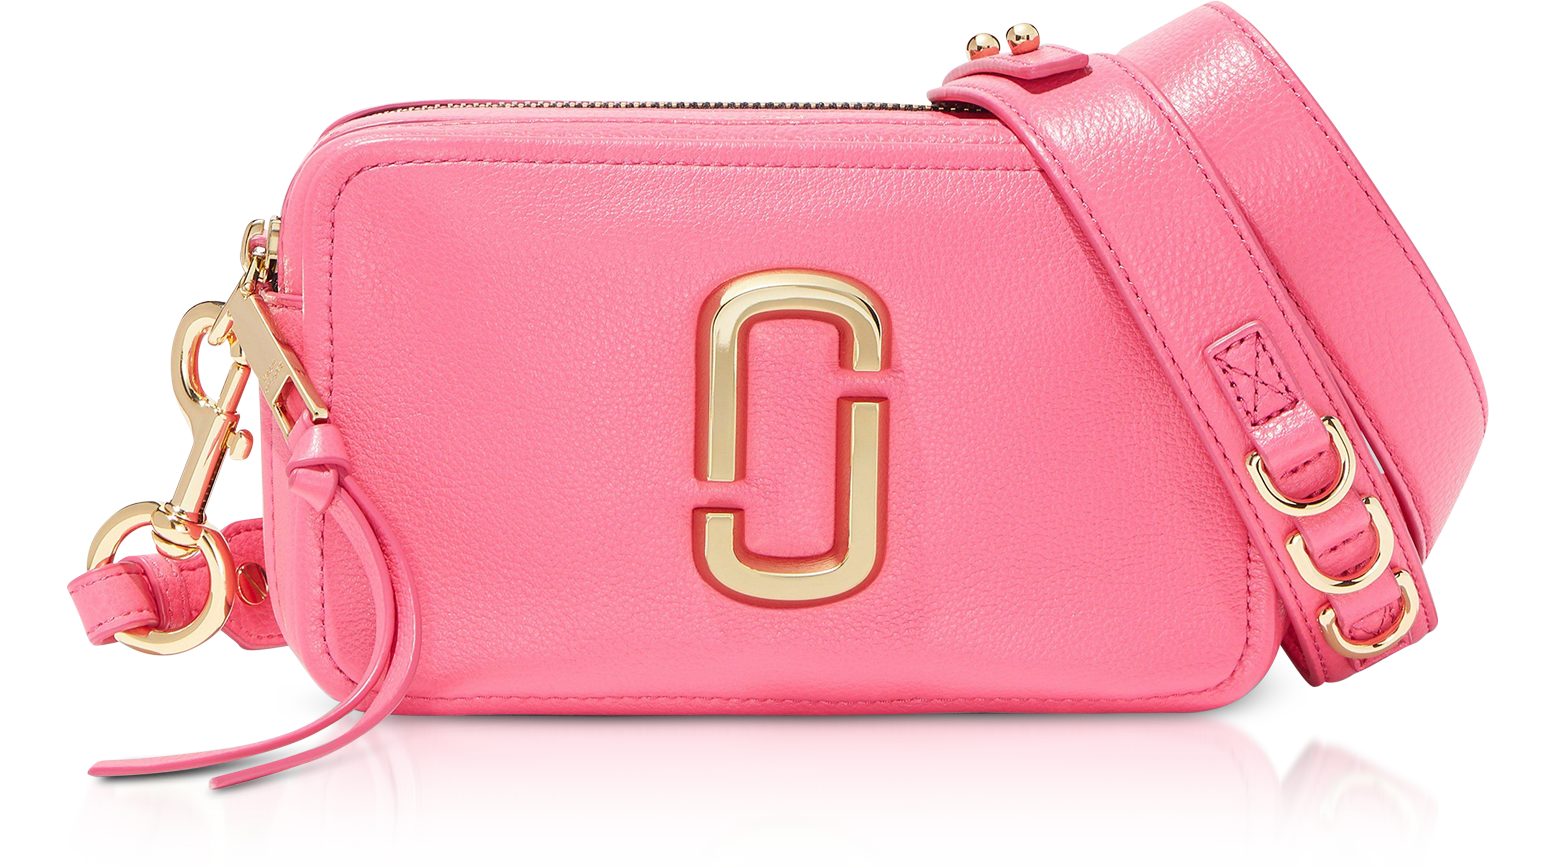 Marc Jacobs Pink Crossbody Bags & Handbags for Women for sale